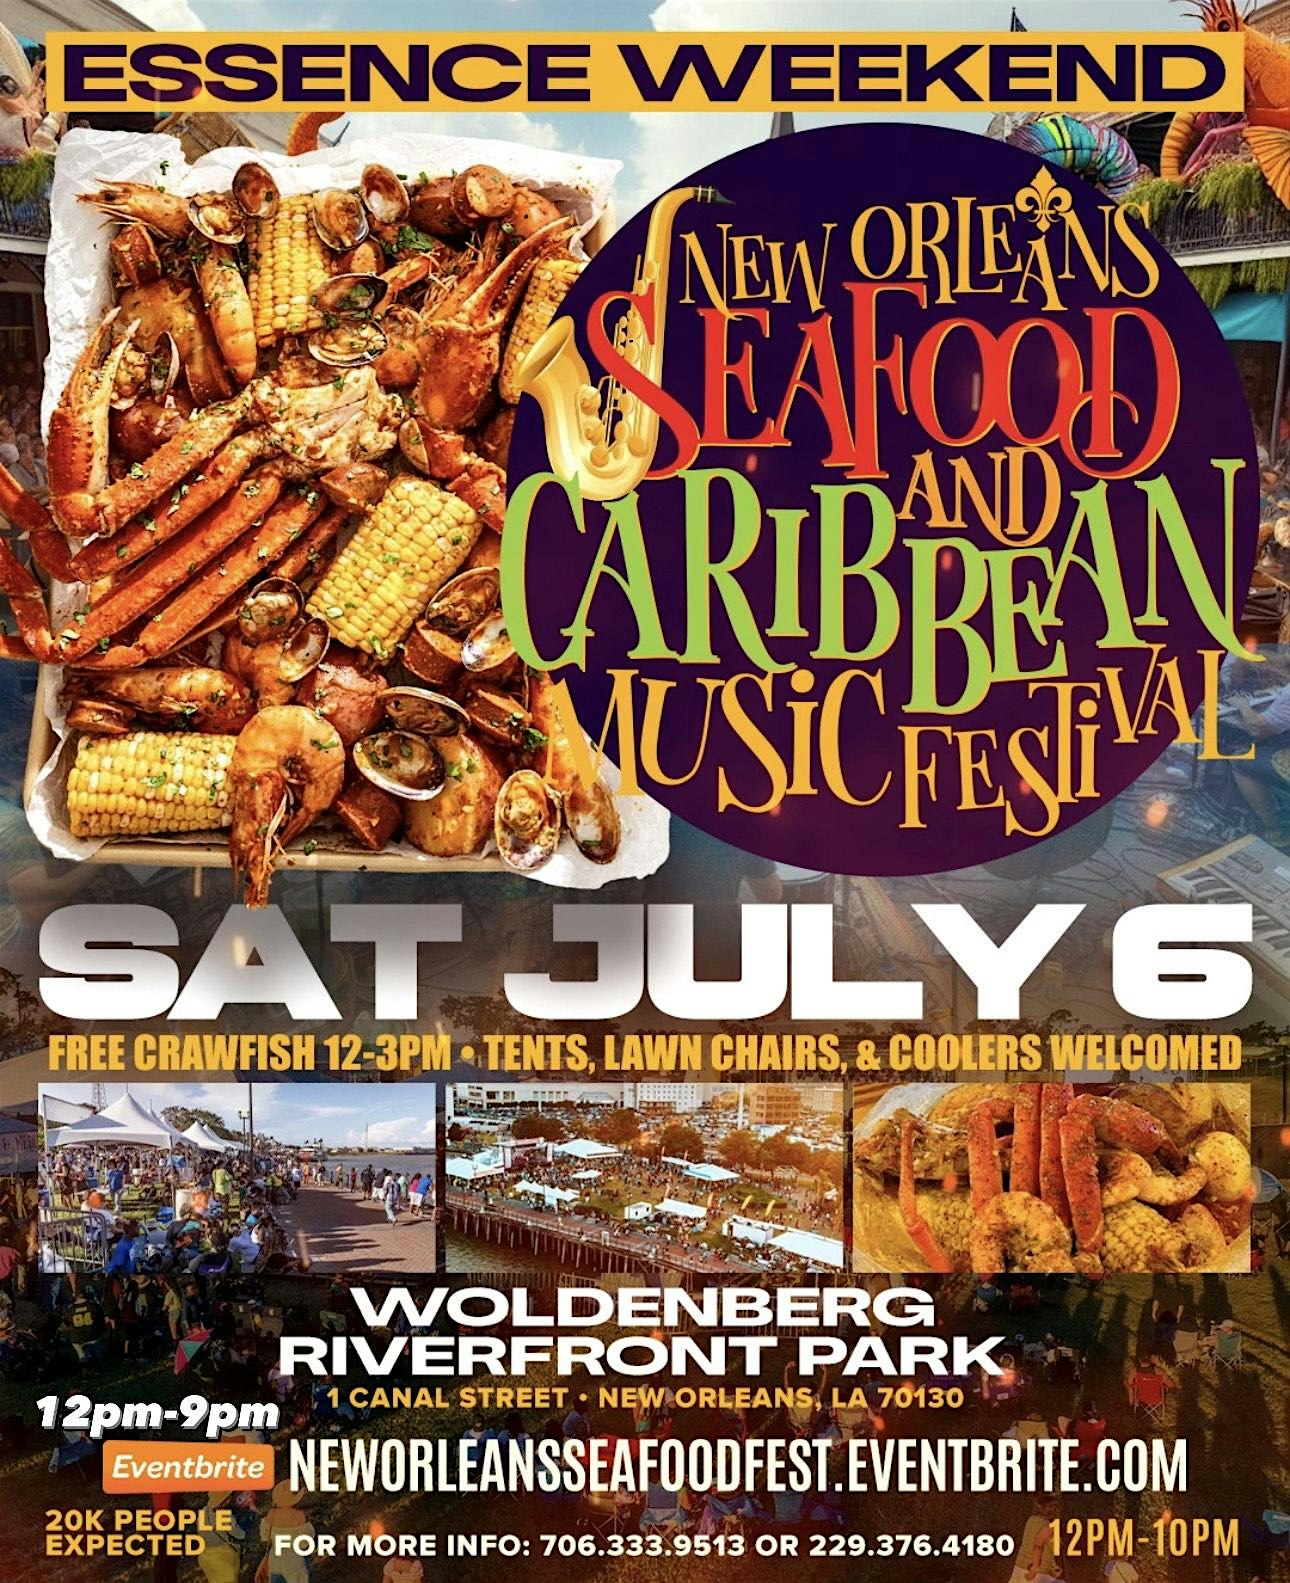 New Orleans Seafood & Caribbean Music Festival (Essence Weekend)